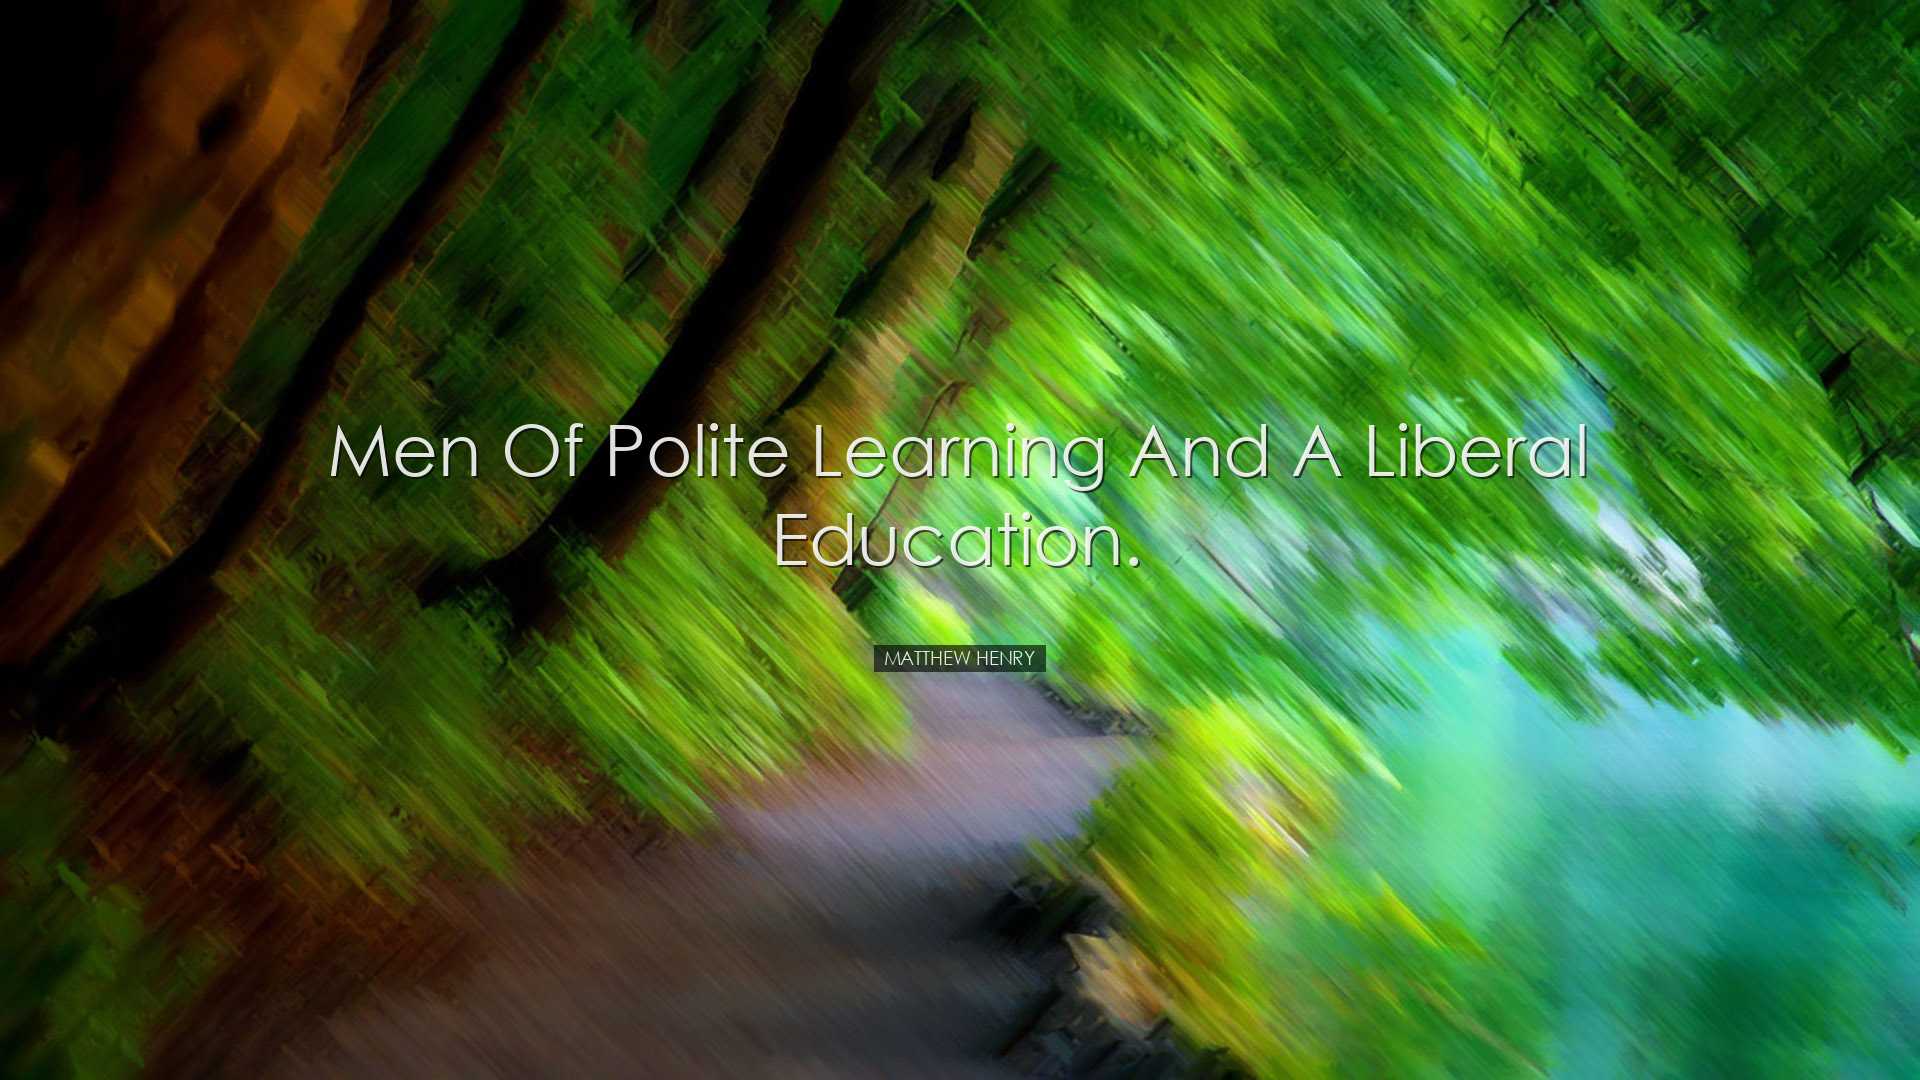 Men of polite learning and a liberal education. - Matthew Henry